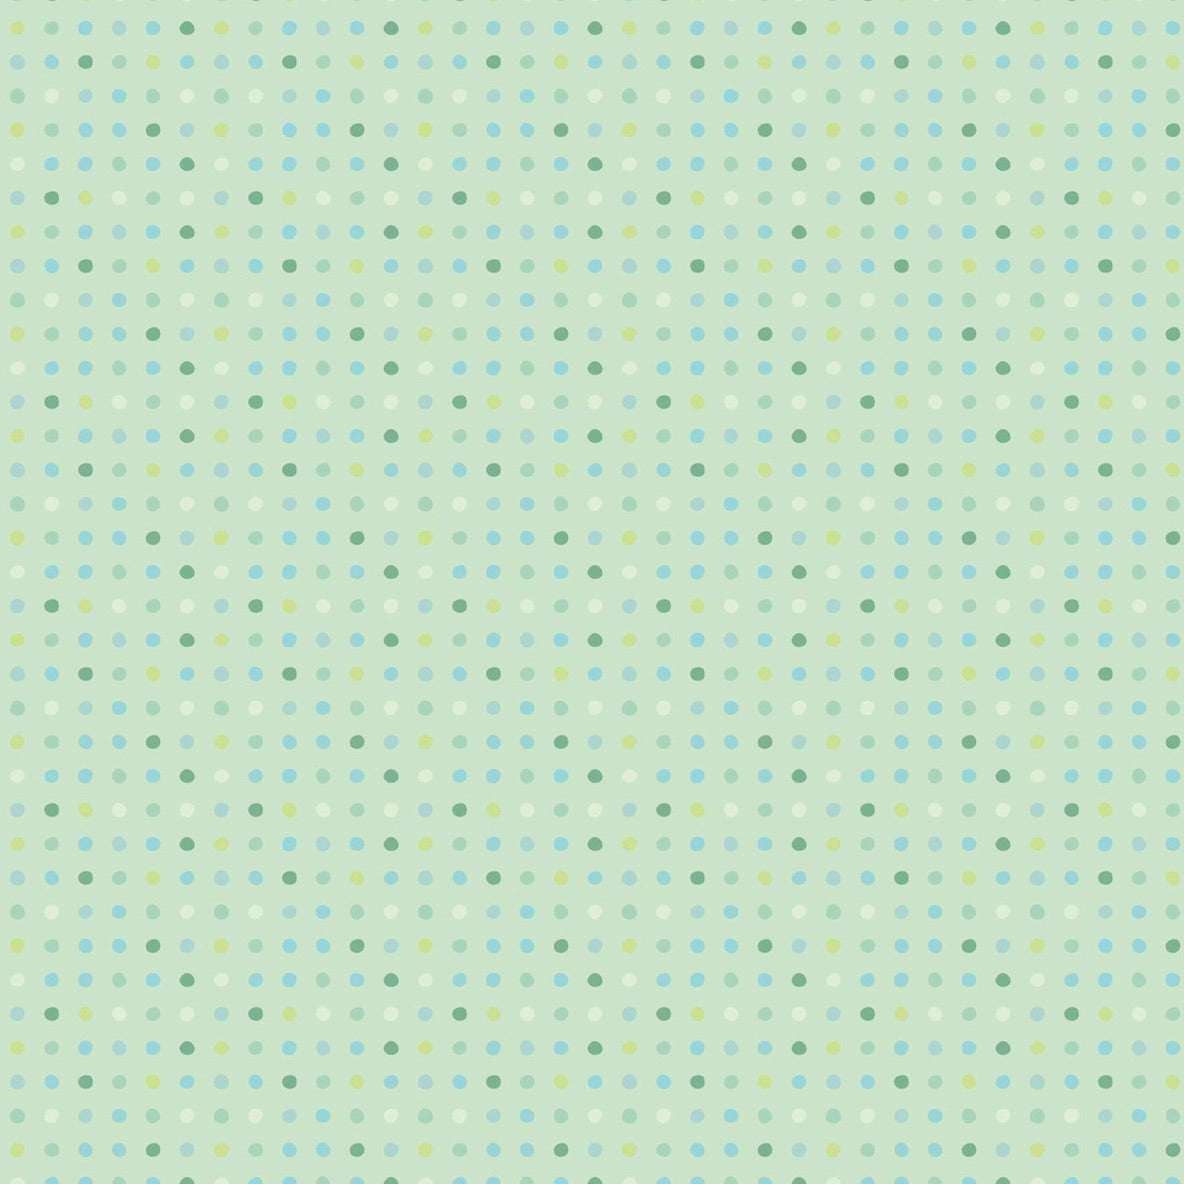 Seeing Spots, Spearmint Green SS24191, sold by the 1/2 yard